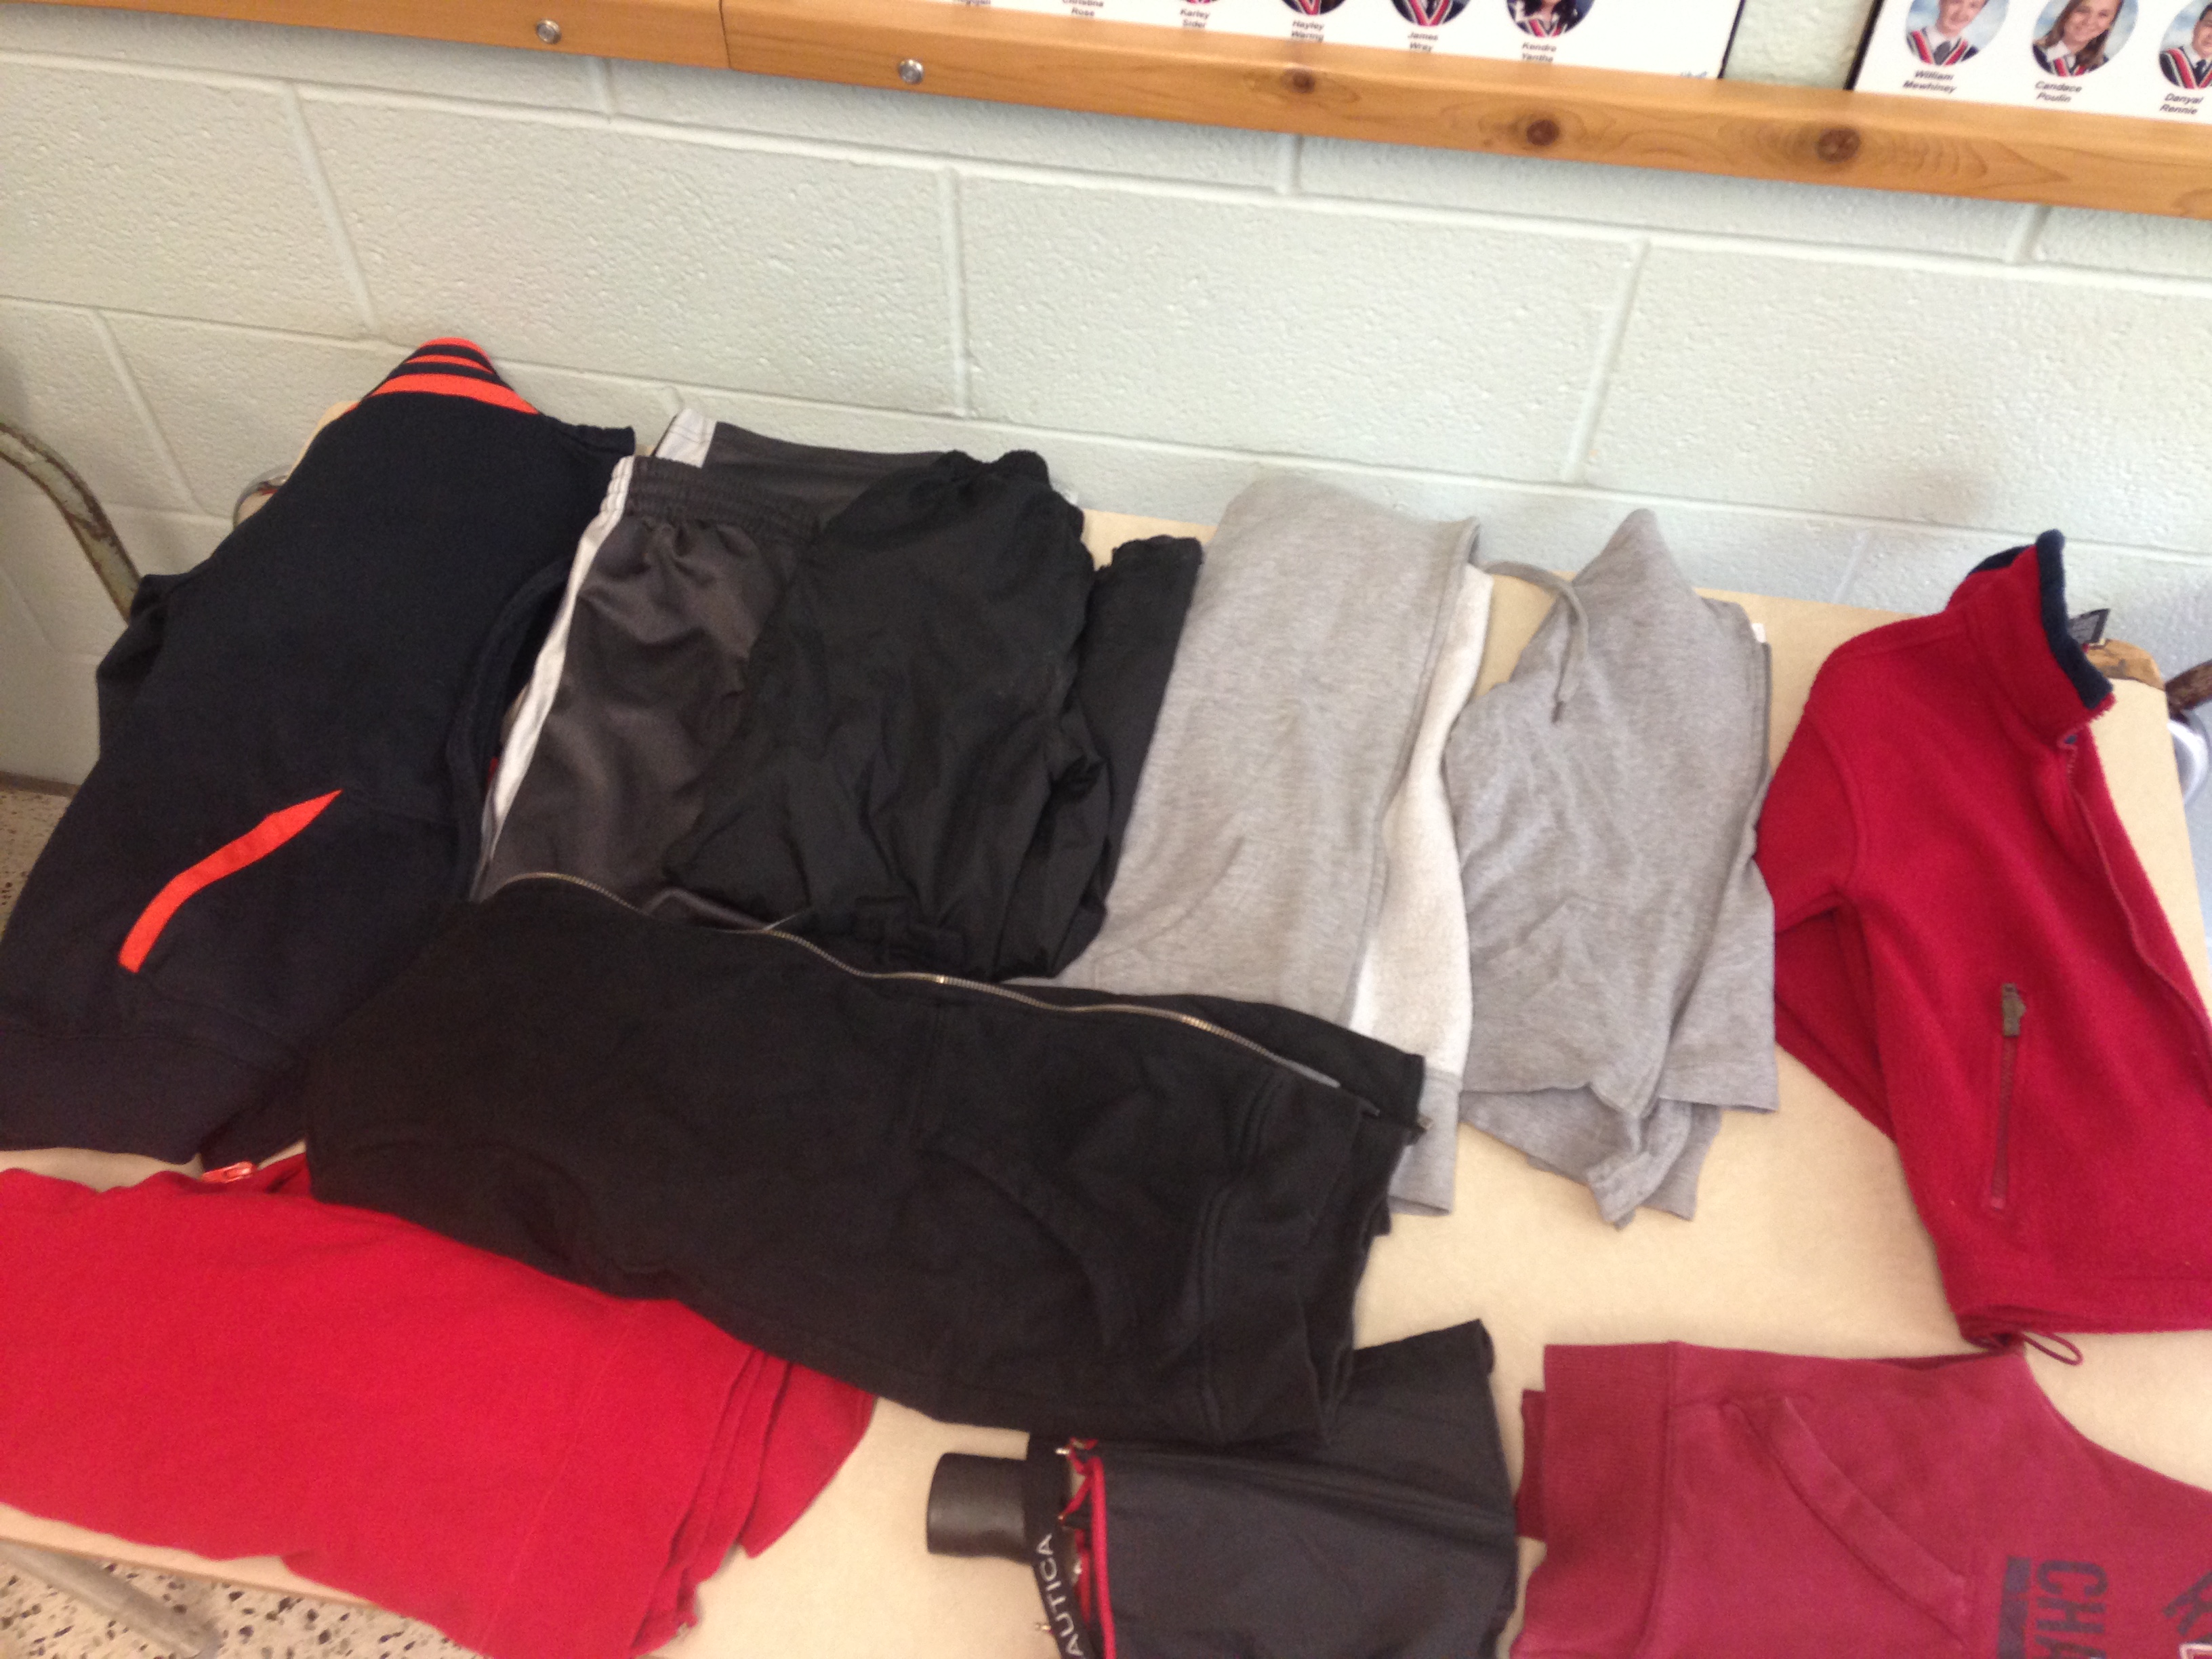 Check our Lost and Found (St. Jacobs Public School)3264 x 2448